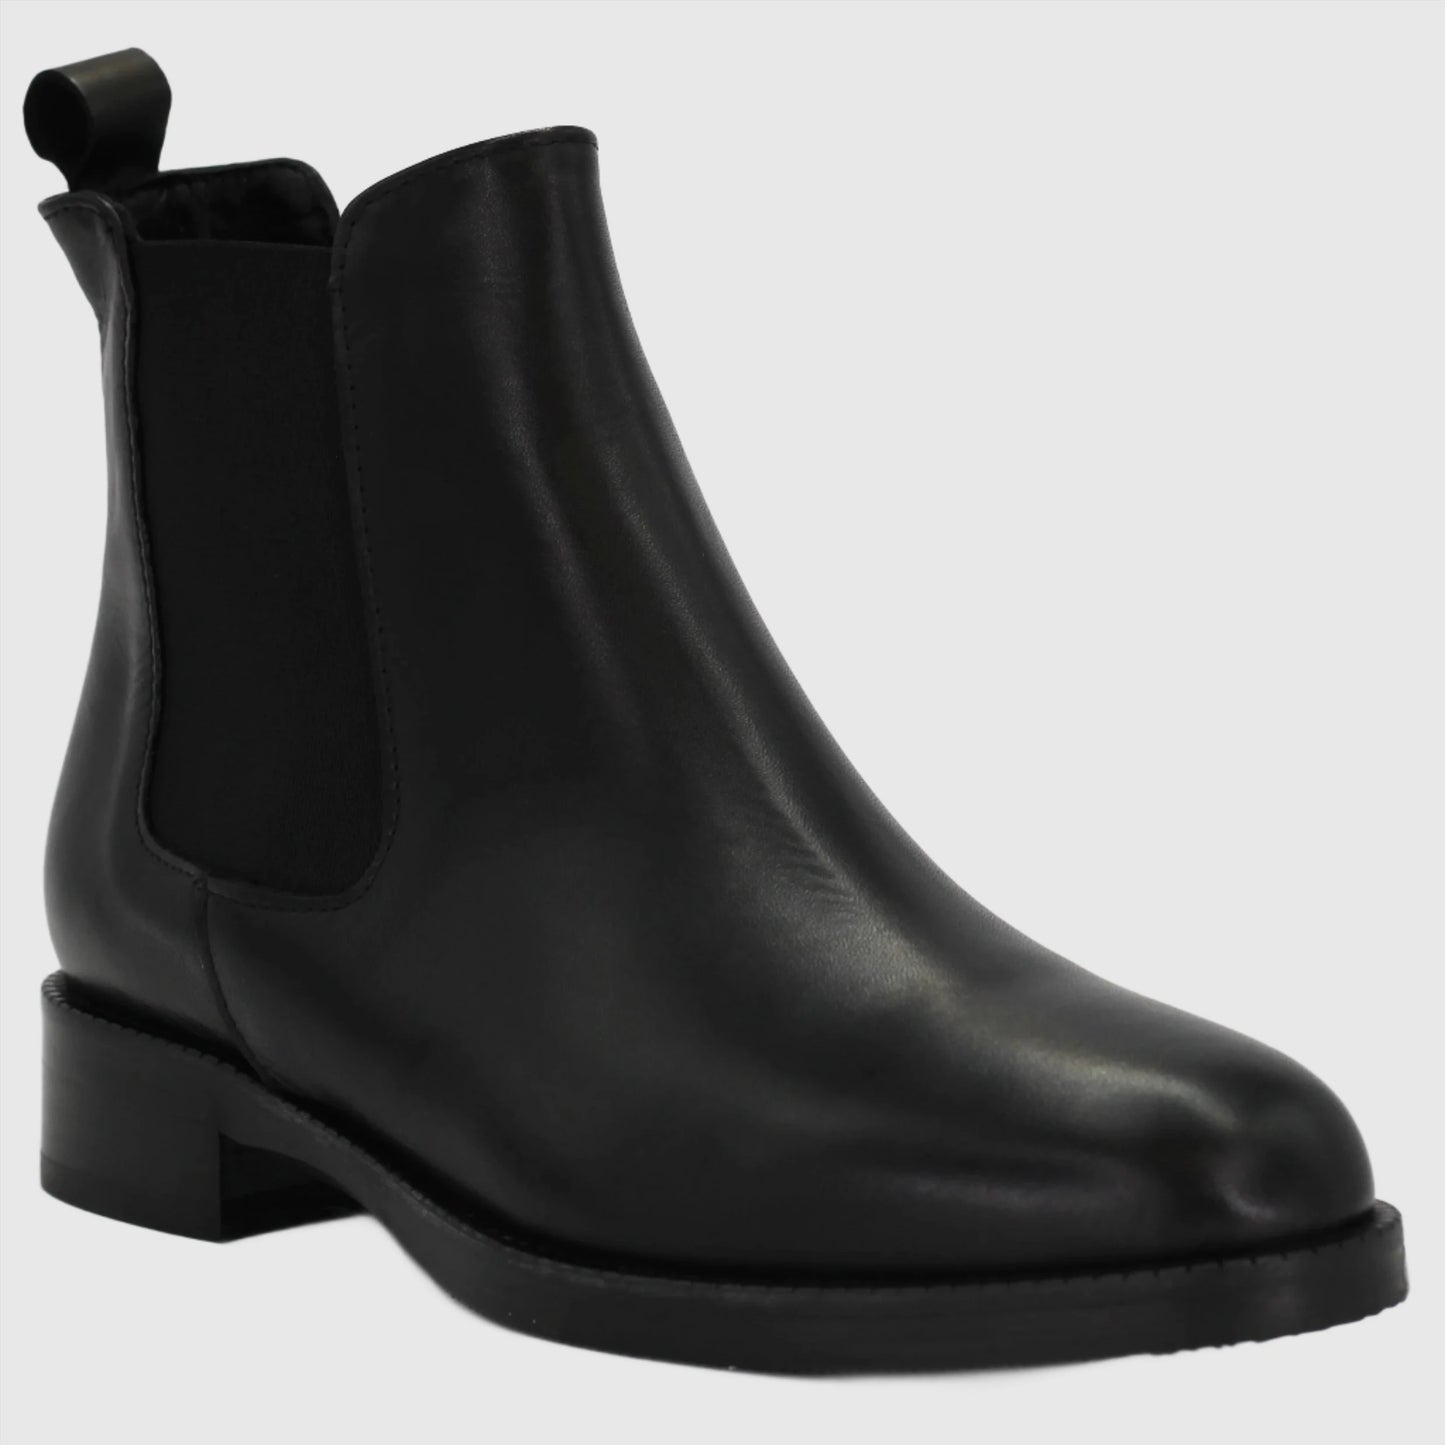 Shop Handmade Italian Leather chelsea boot in nero (GC2030) or browse our range of hand-made Italian shoes in leather or suede in-store at Aliverti Cape Town, or shop online. We deliver in South Africa & offer multiple payment plans as well as accept multiple safe & secure payment methods.